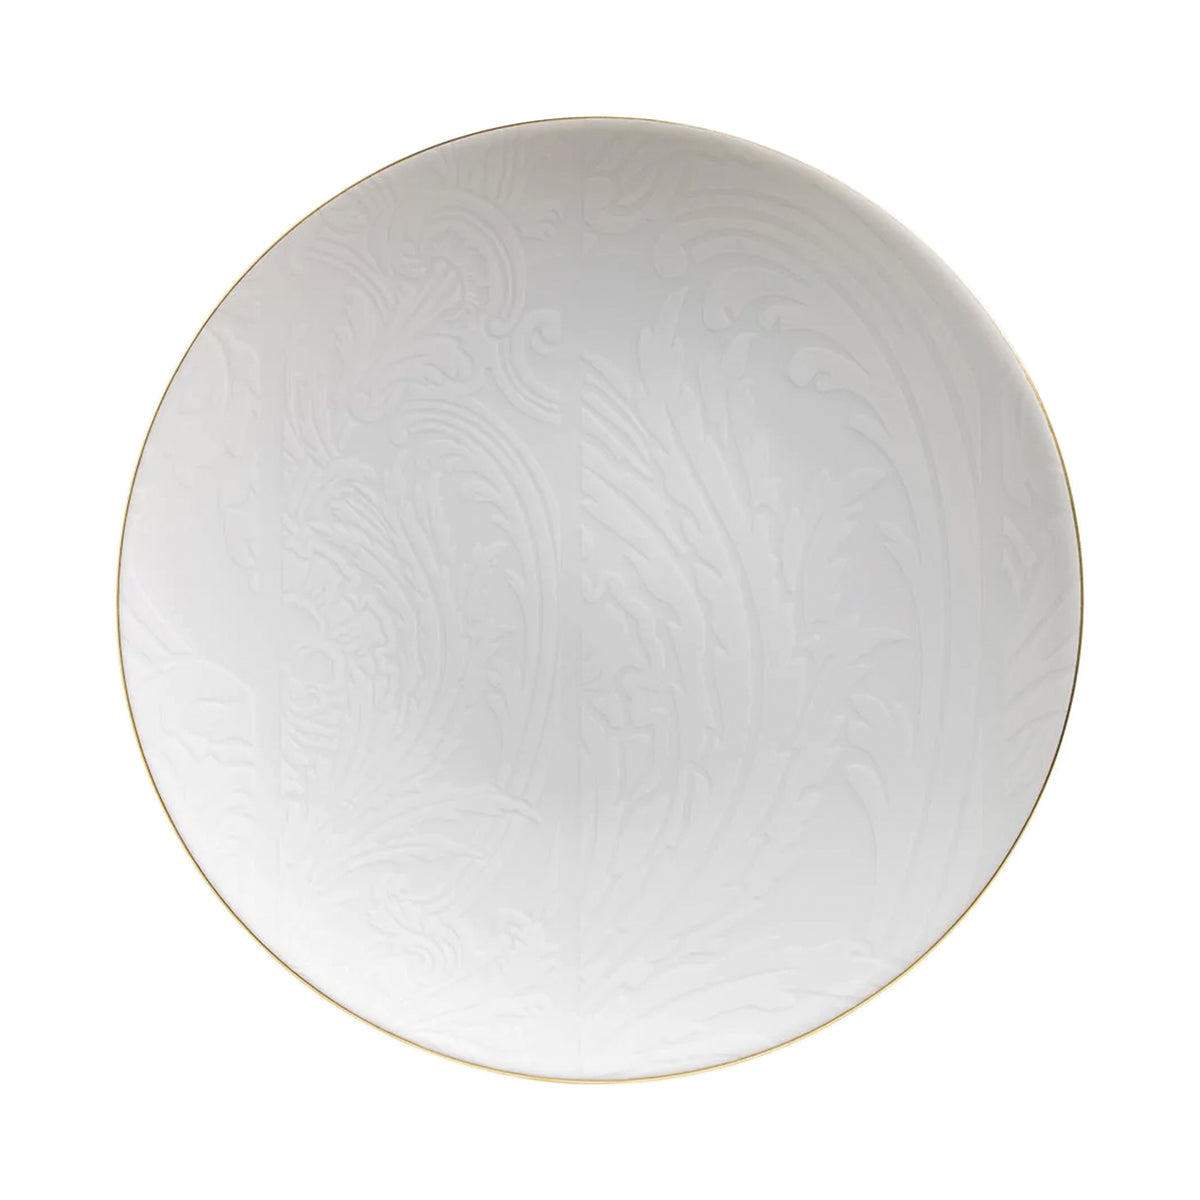 INDIENNES White with gold fillet - 29 cm plate                                